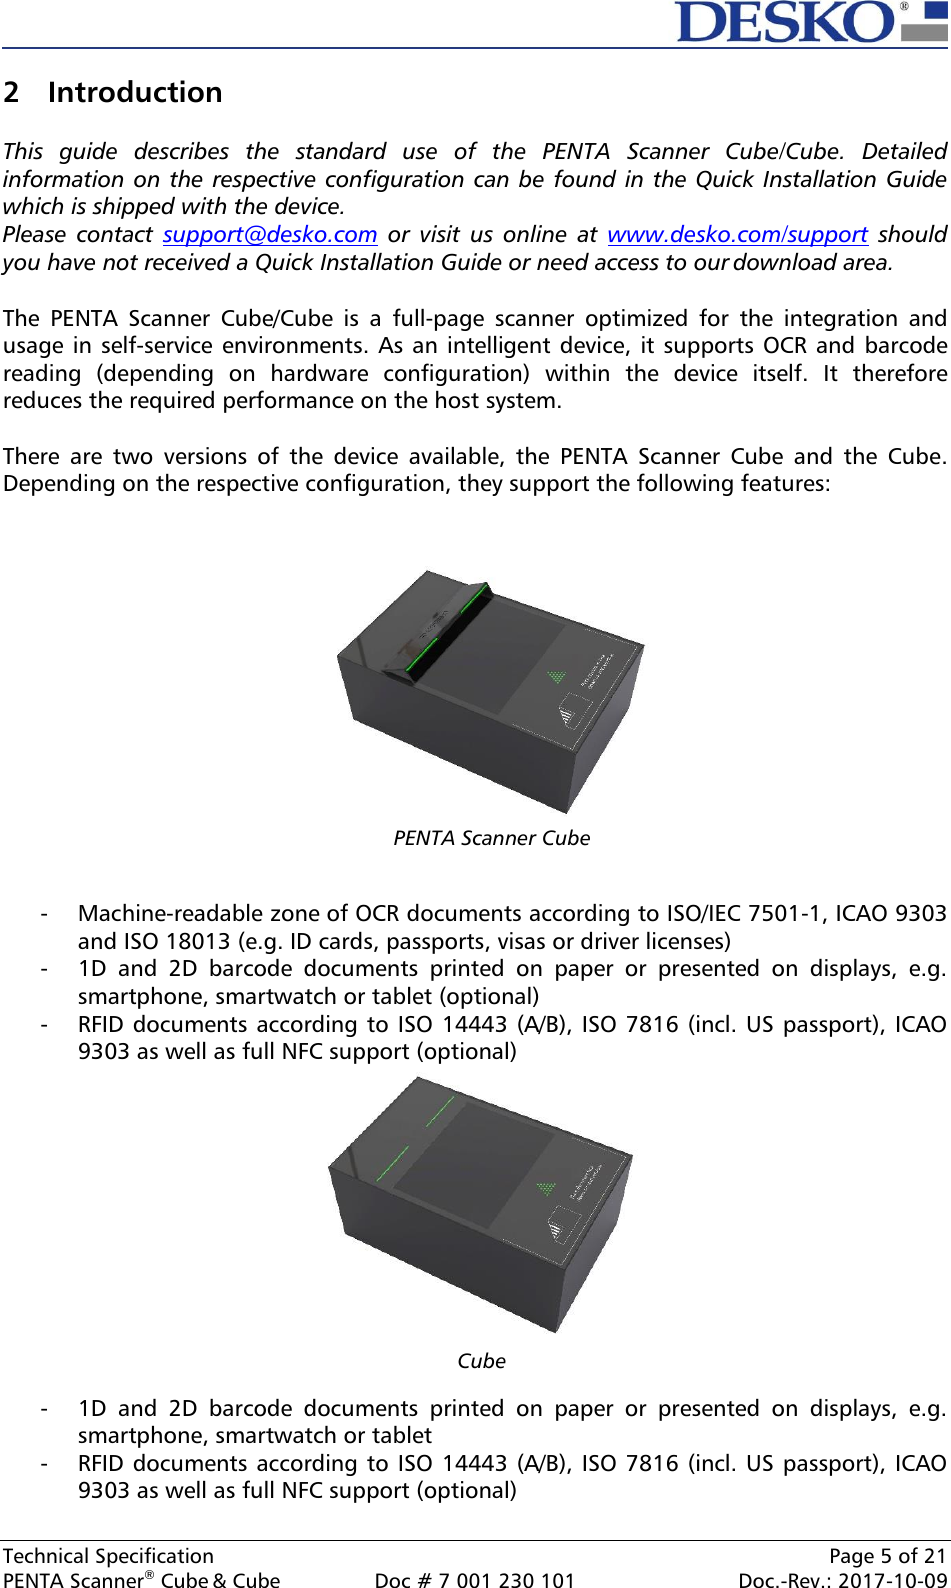  Technical Specification    Page 5 of 21 PENTA Scanner® Cube &amp; Cube  Doc # 7 001 230 101  Doc.-Rev.: 2017-10-09    Cube  2 Introduction  This  guide  describes  the  standard  use  of  the  PENTA  Scanner  Cube/Cube.  Detailed information on the respective configuration can be found in the Quick Installation Guide which is shipped with the device. Please  contact  support@desko.com  or  visit  us  online  at  www.desko.com/support  should you have not received a Quick Installation Guide or need access to our download area.  The  PENTA  Scanner  Cube/Cube  is  a  full-page  scanner  optimized  for  the  integration  and usage in self-service environments. As an intelligent device, it supports OCR and  barcode reading  (depending  on  hardware  configuration)  within  the  device  itself.  It  therefore reduces the required performance on the host system.  There  are  two  versions  of  the  device  available,  the  PENTA  Scanner  Cube  and  the  Cube. Depending on the respective configuration, they support the following features:     - Machine-readable zone of OCR documents according to ISO/IEC 7501-1, ICAO 9303 and ISO 18013 (e.g. ID cards, passports, visas or driver licenses) - 1D  and  2D  barcode  documents  printed  on  paper  or  presented  on  displays,  e.g. smartphone, smartwatch or tablet (optional) - RFID documents according to ISO 14443 (A/B), ISO 7816 (incl. US passport), ICAO 9303 as well as full NFC support (optional)  - 1D  and  2D  barcode  documents  printed  on  paper  or  presented  on  displays,  e.g. smartphone, smartwatch or tablet - RFID documents according to ISO 14443 (A/B), ISO 7816 (incl. US passport), ICAO 9303 as well as full NFC support (optional)  PENTA Scanner Cube  